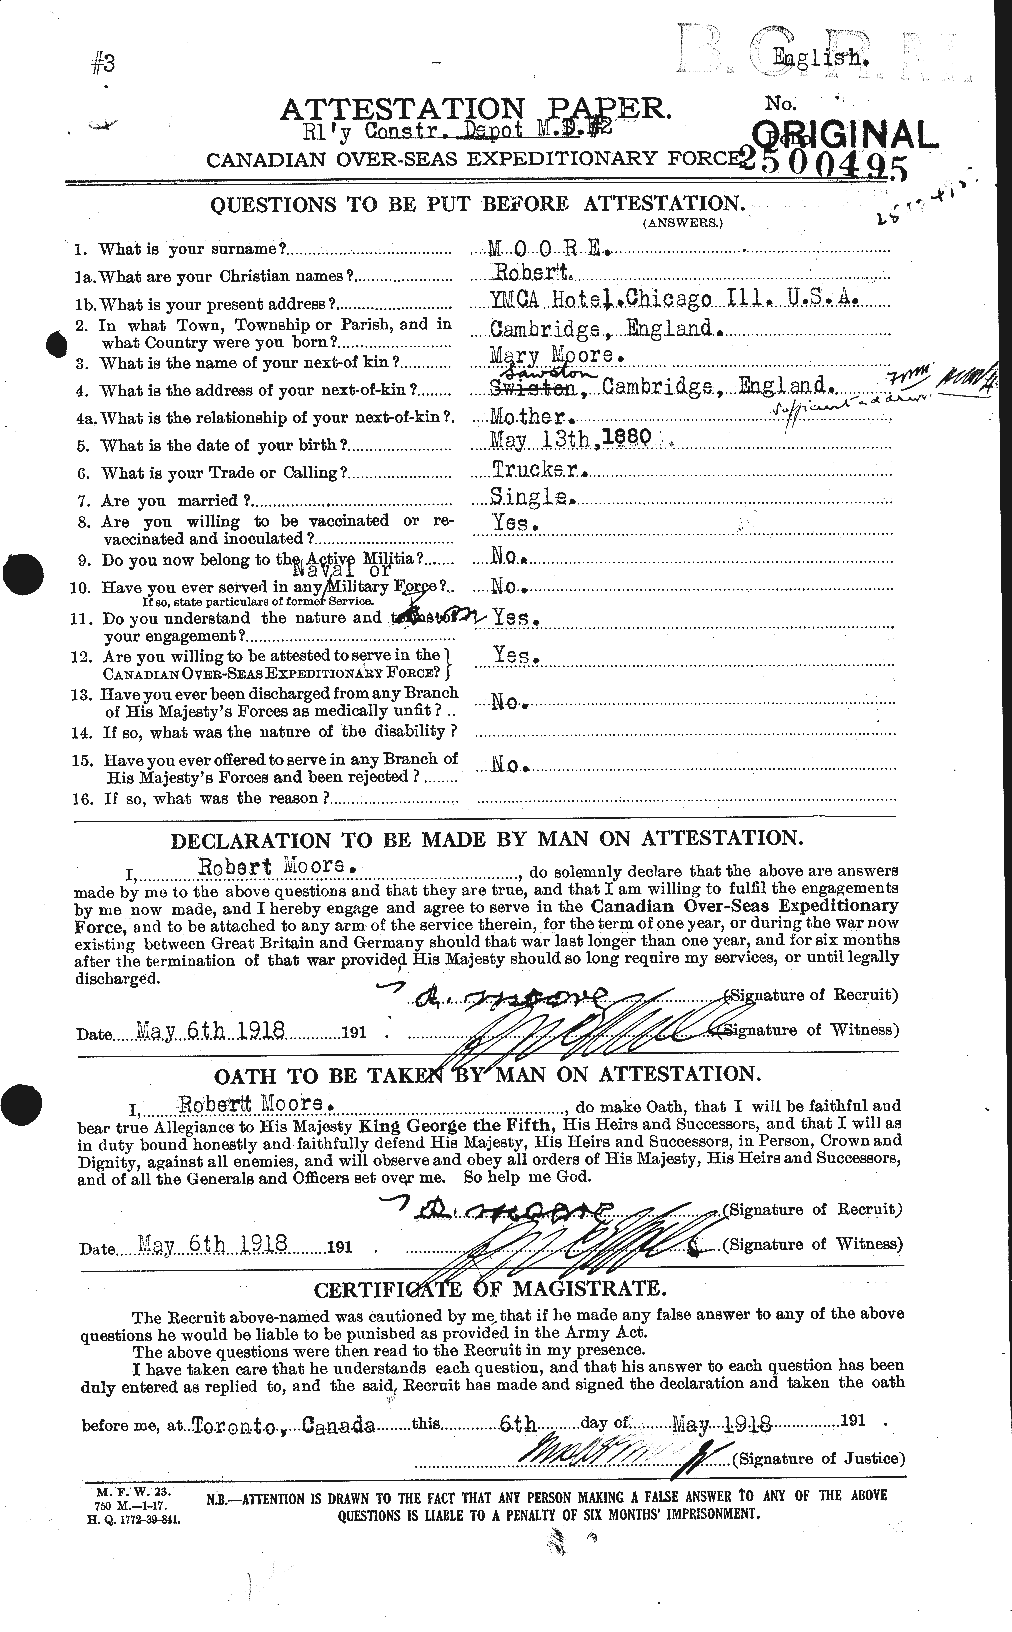 Personnel Records of the First World War - CEF 503552a